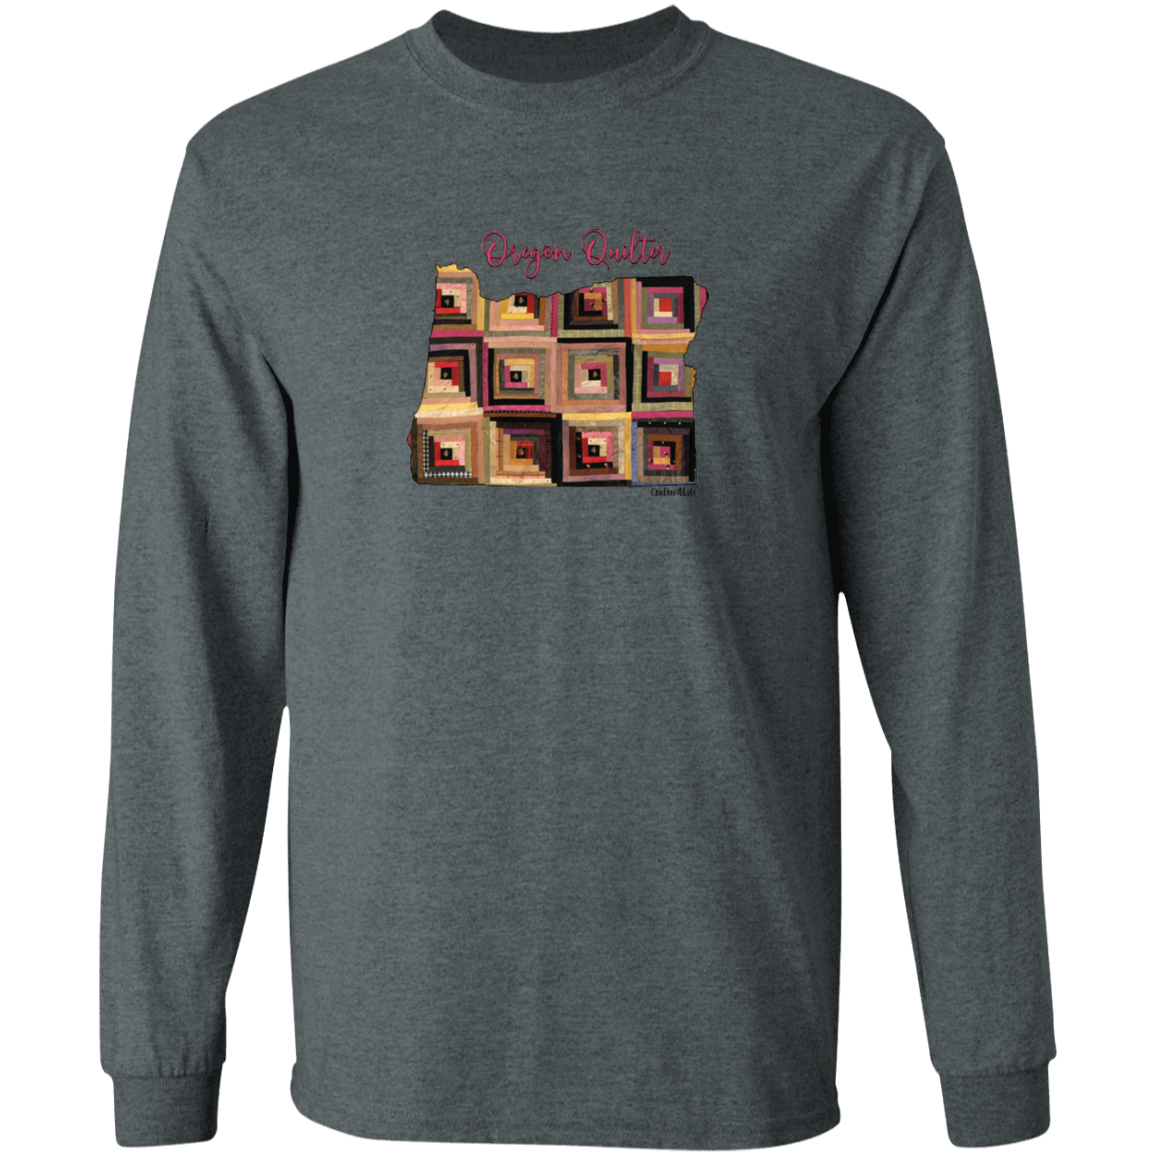 Oregon Quilter Long Sleeve T-Shirt, Gift for Quilting Friends and Family